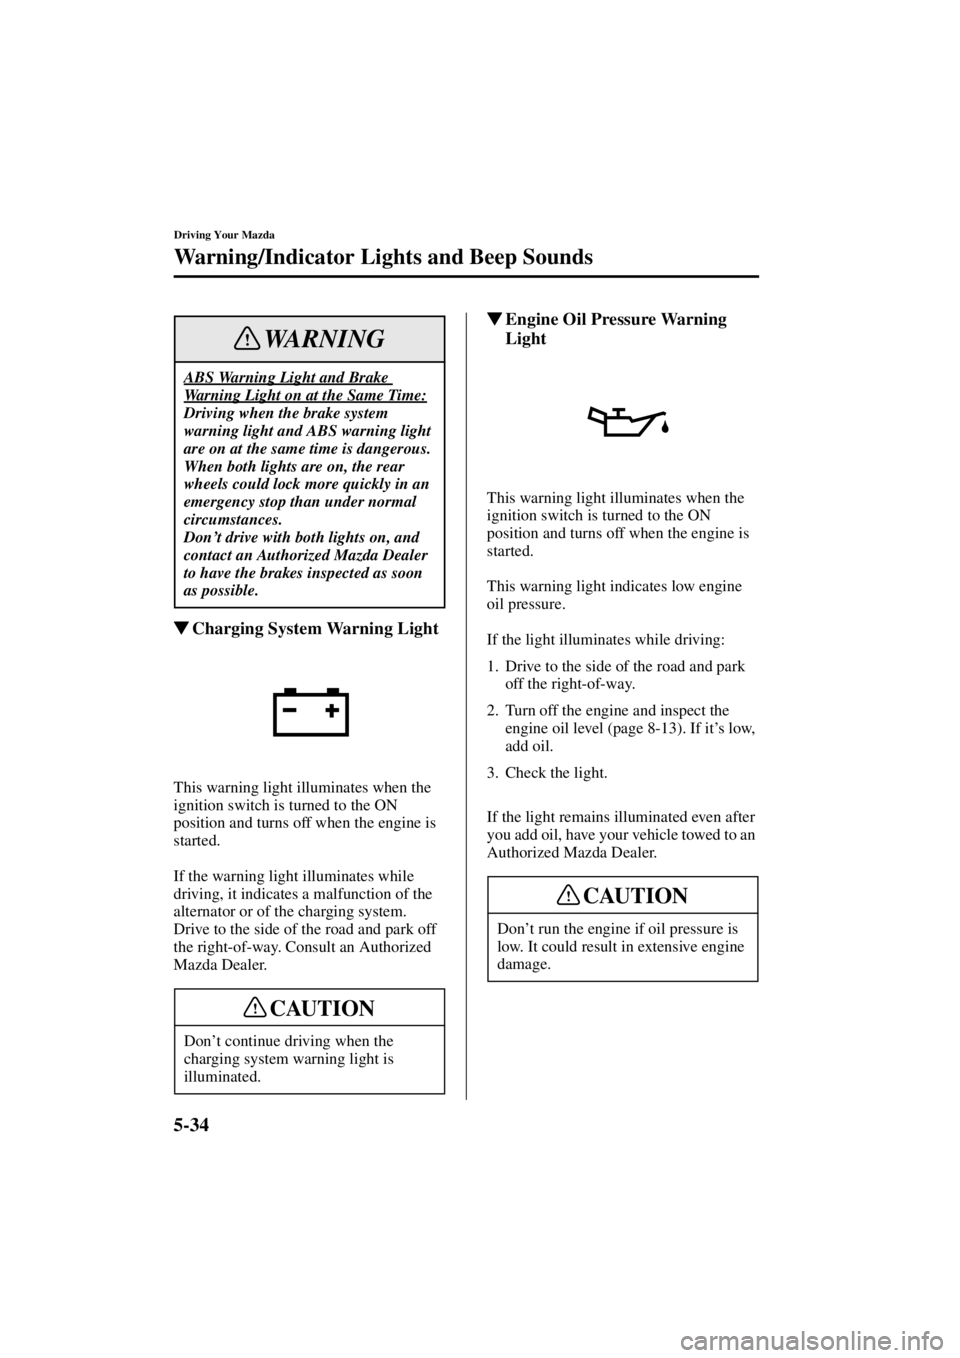 MAZDA MODEL 3 5-DOOR 2004  Owners Manual 5-34
Driving Your Mazda
Warning/Indicator Lights and Beep Sounds
Form No. 8S18-EA-03I
Charging System Warning Light
This warning light illuminates when the 
ignition switch is turned to the ON 
posit